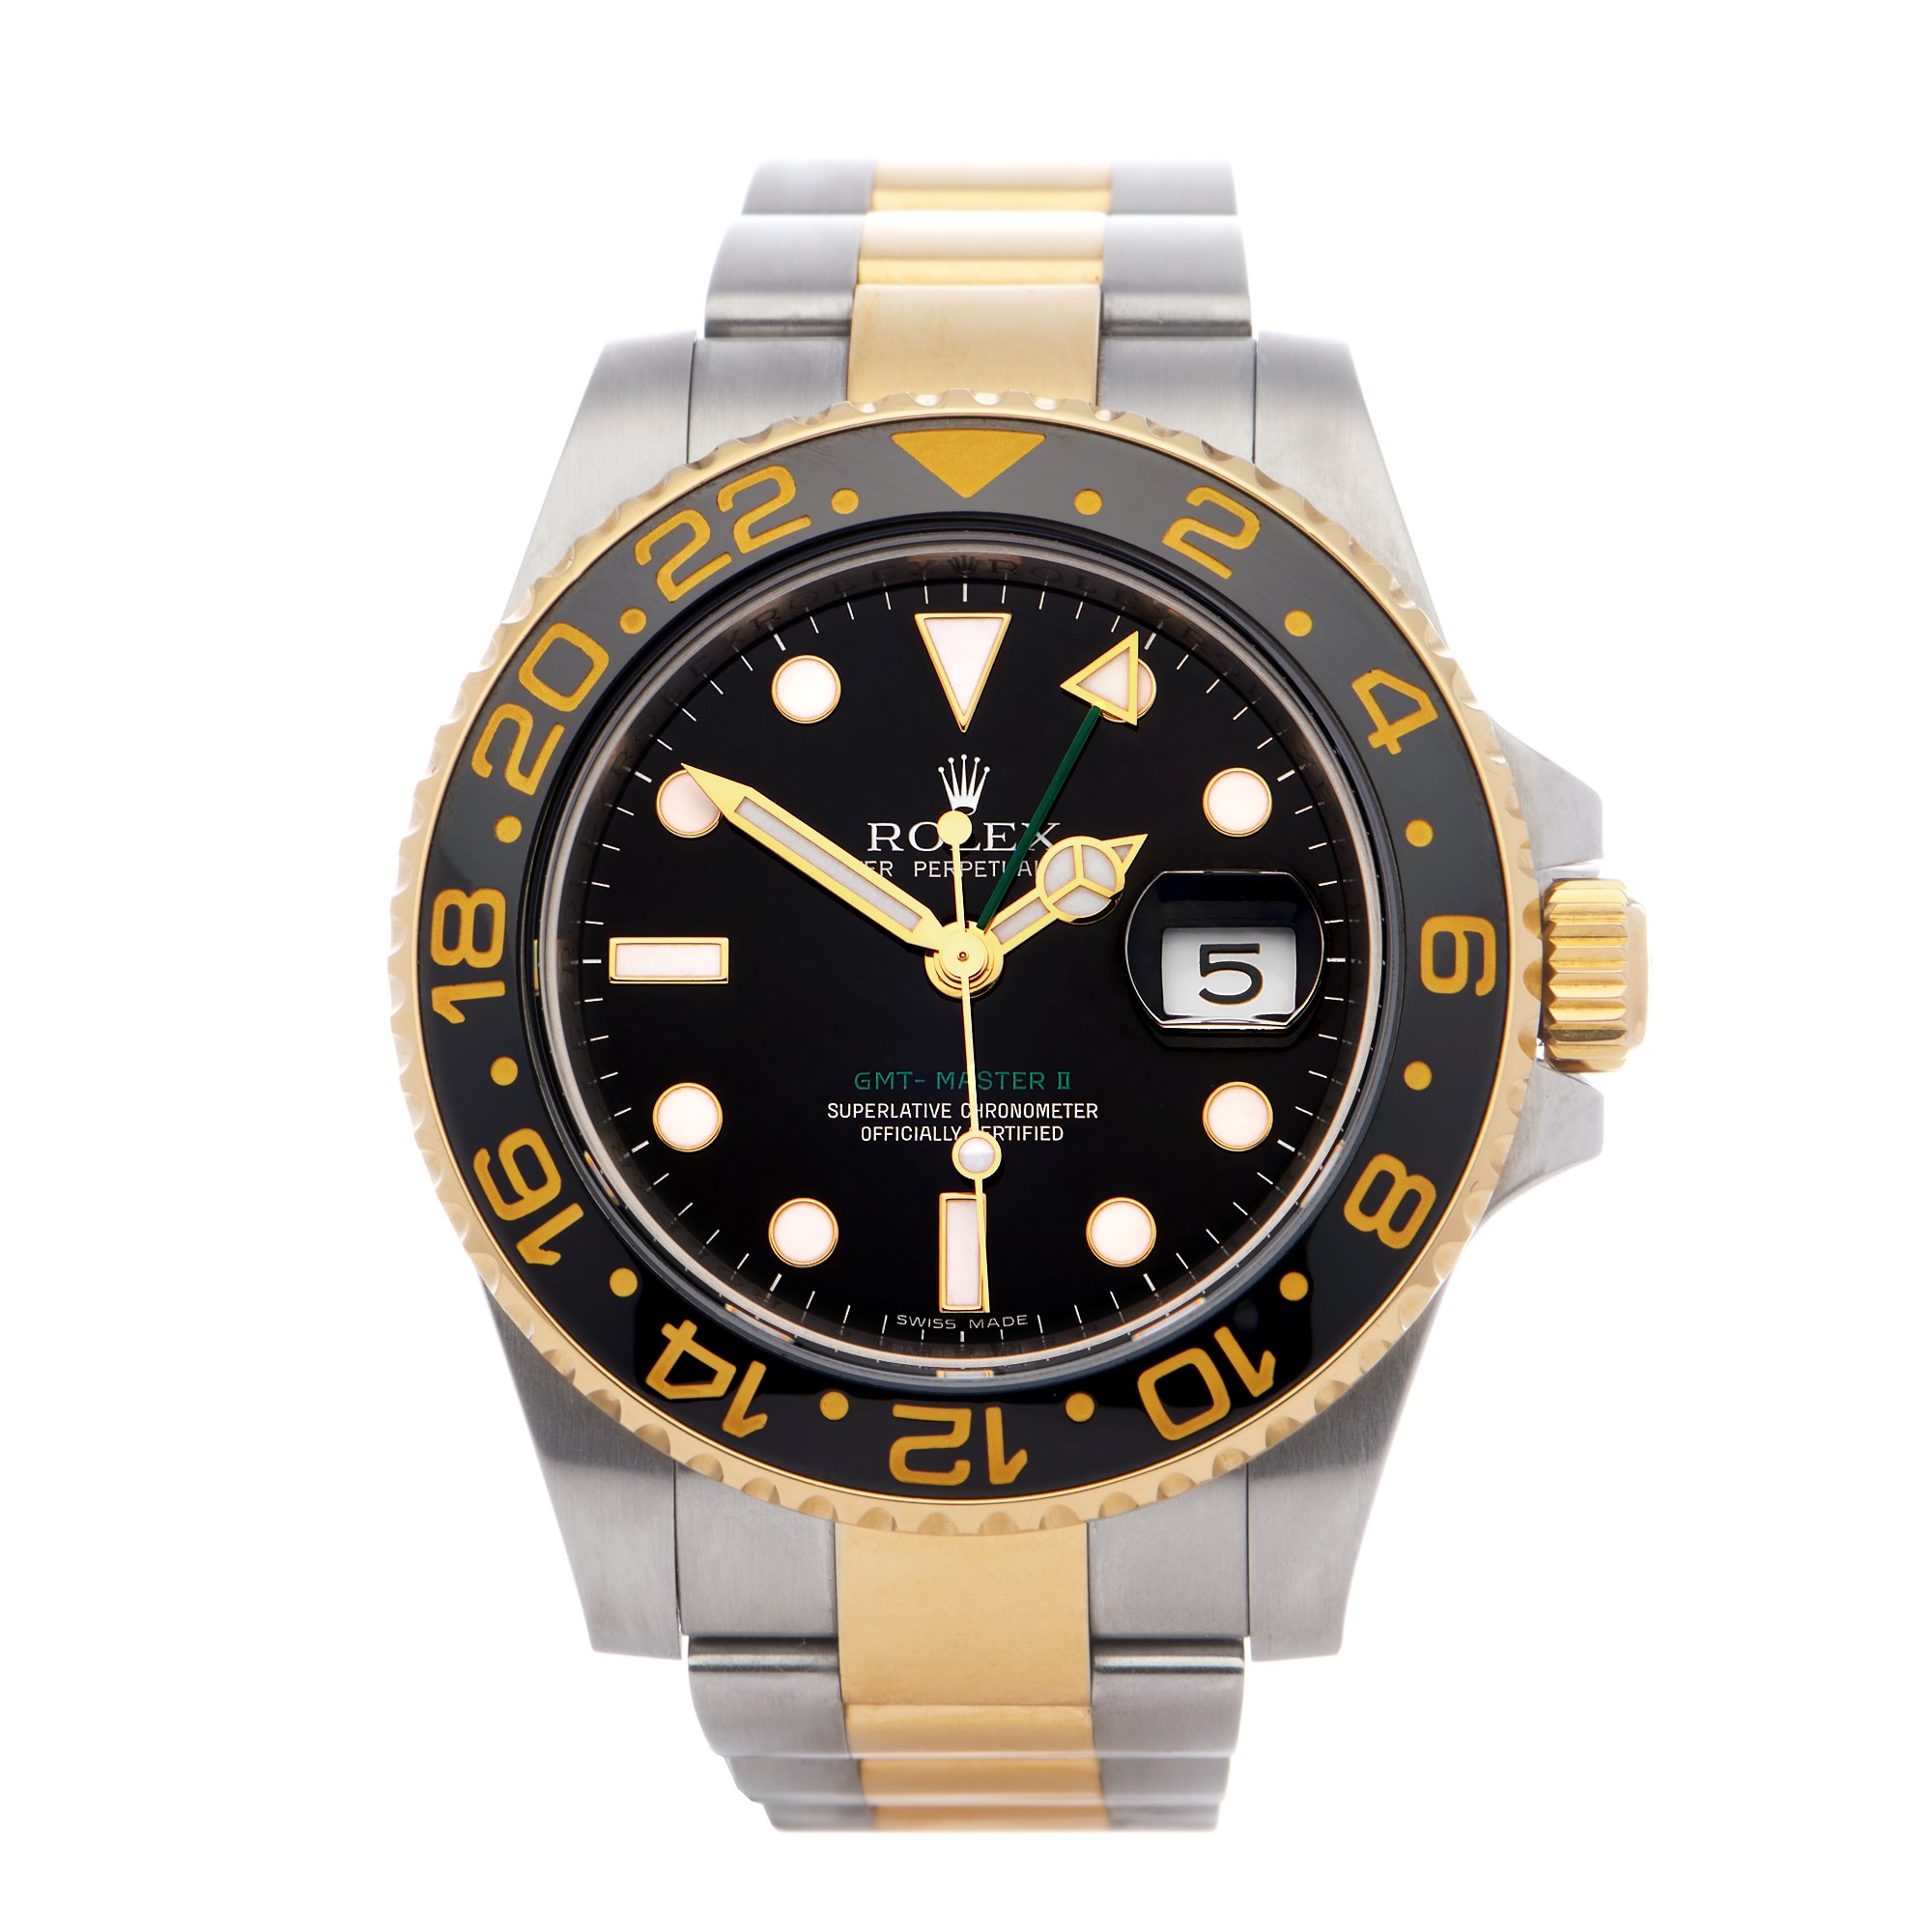 Rolex GMT-Master II 18K Yellow Gold & Stainless Steel 116713LN